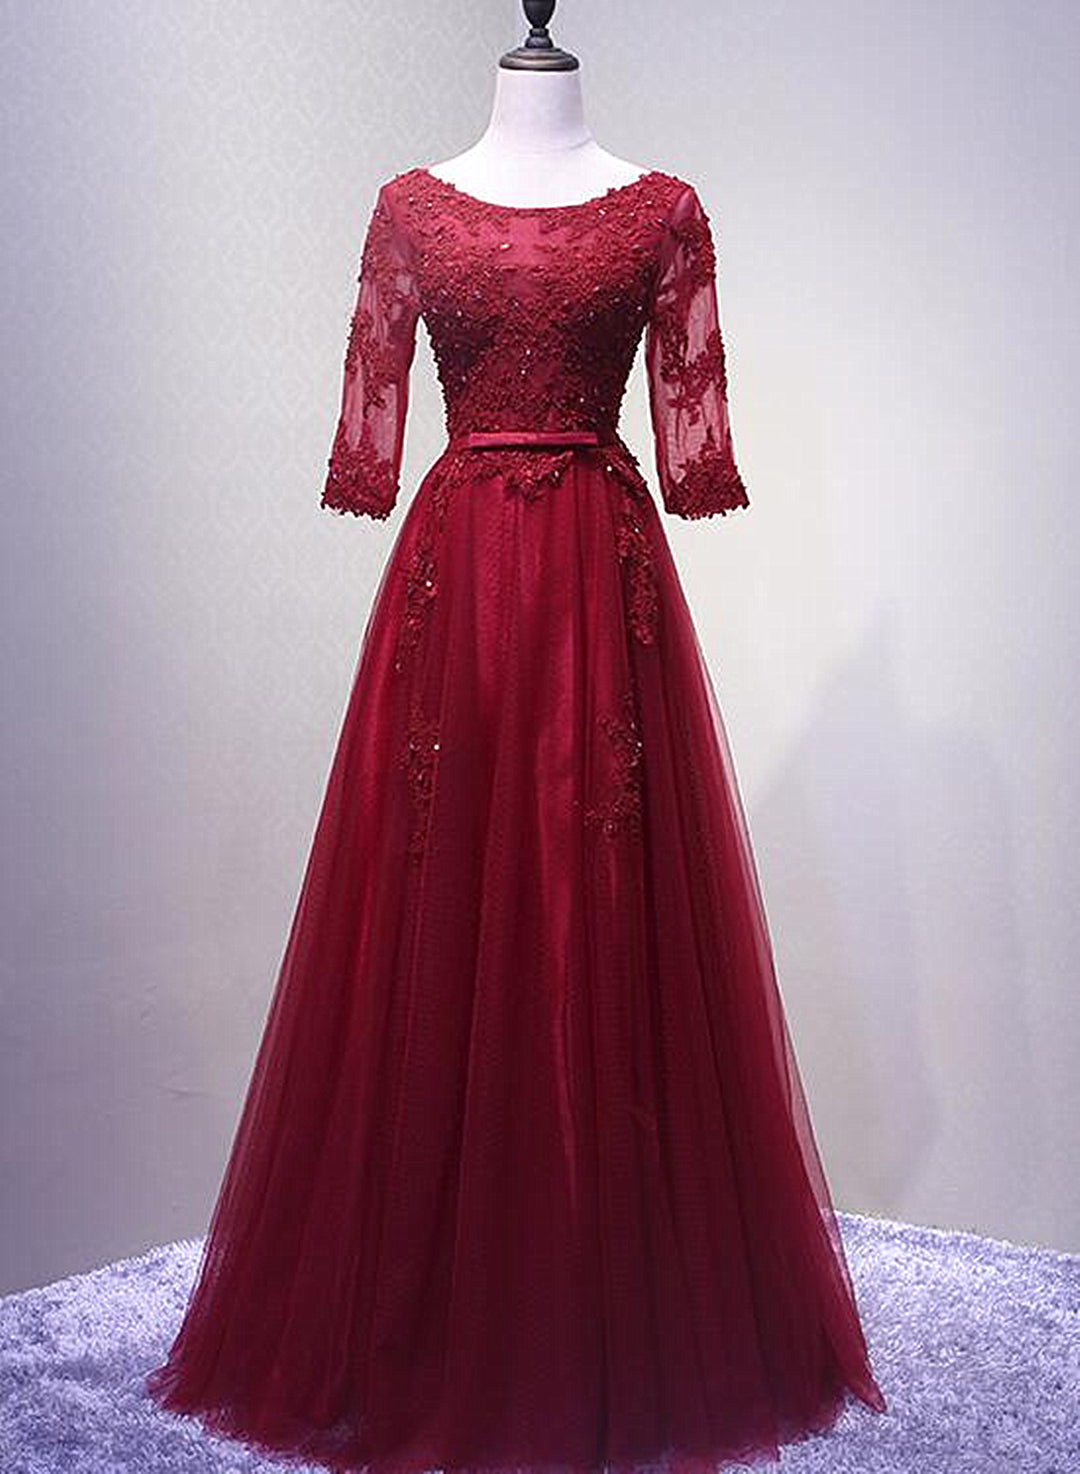 Wedsing Dress Princess, Charming Wine Red Short Sleeves Lace Applique Wedding Party Dress, Formal Gown